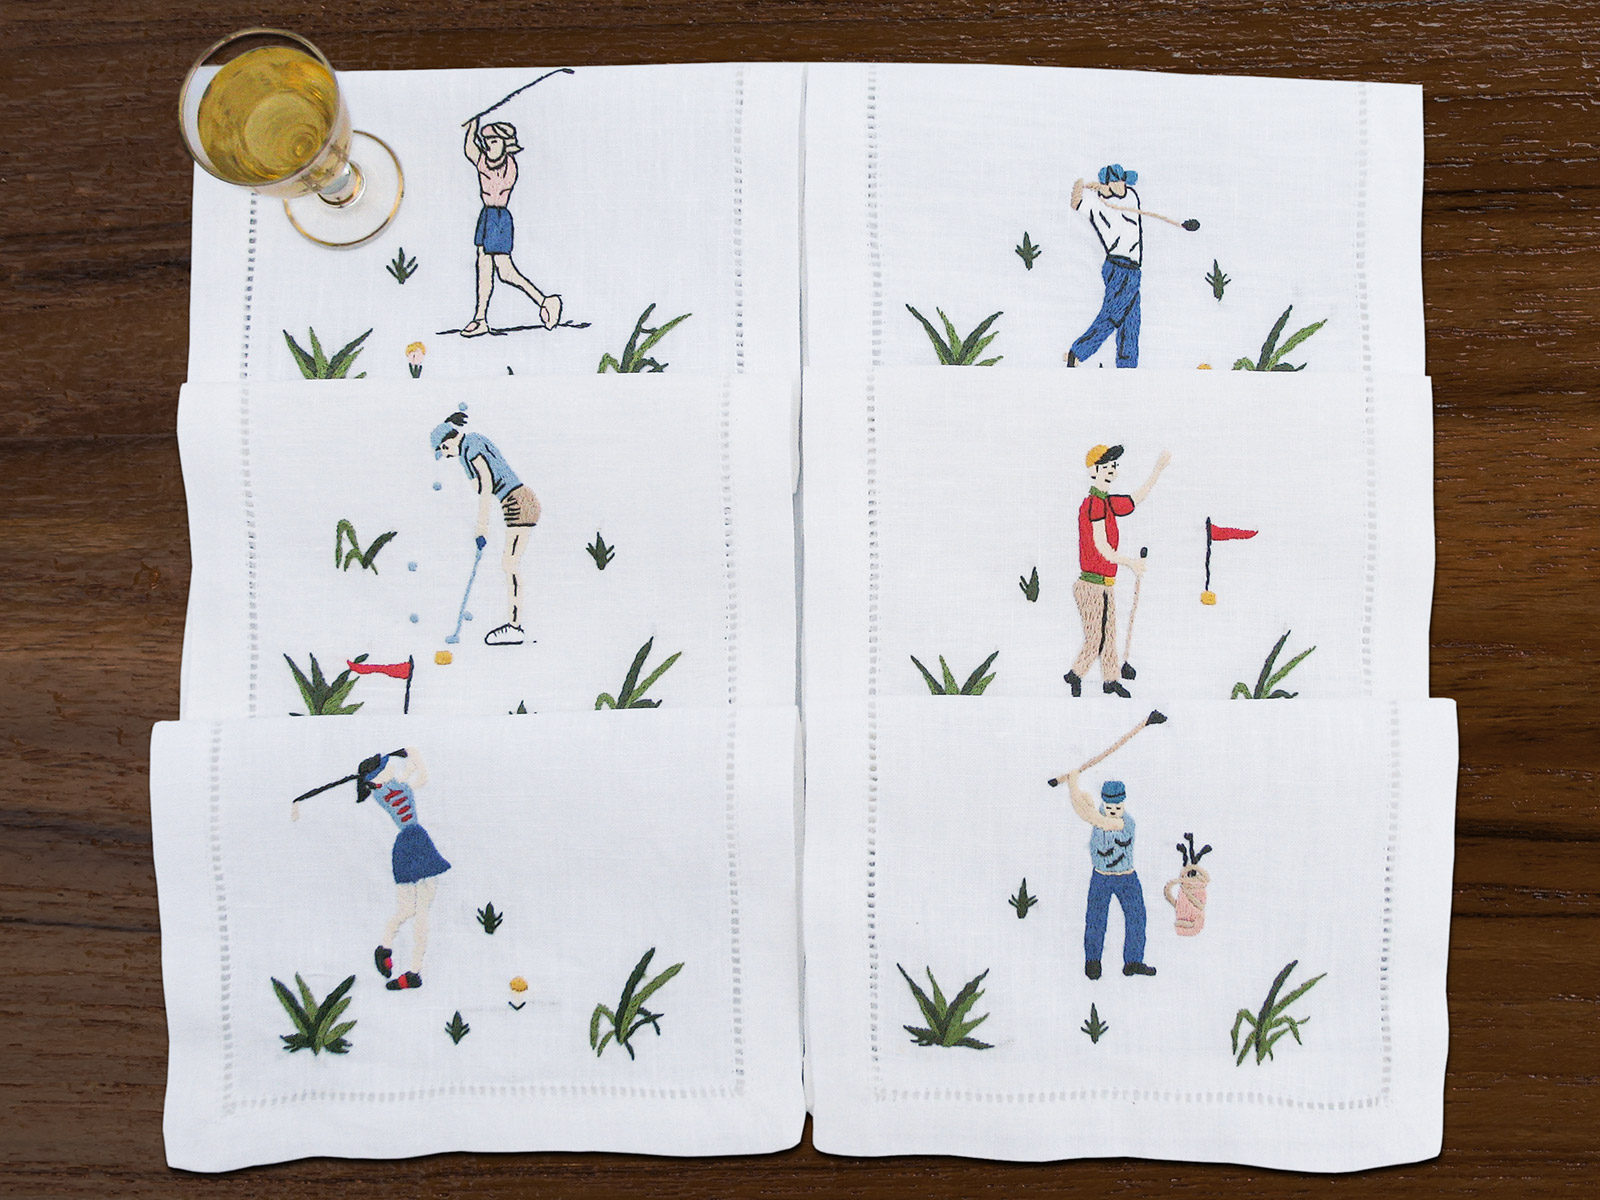 FORE! Set of 6 Cocktail Napkins embroidered with Golfing themes